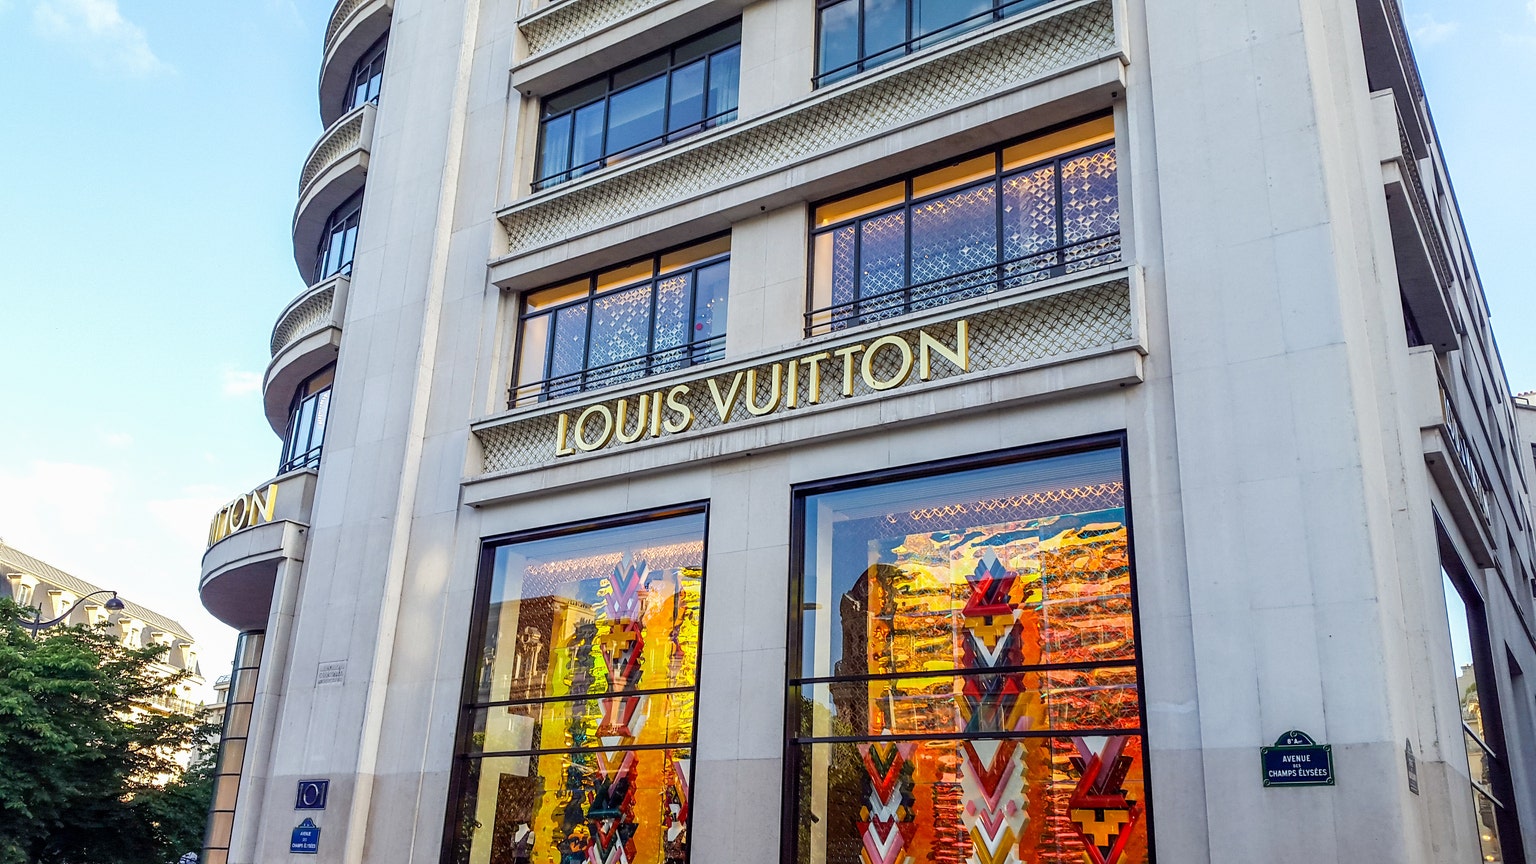 Will luxury brand LVMH continue to outpace the stock market? - Valutico